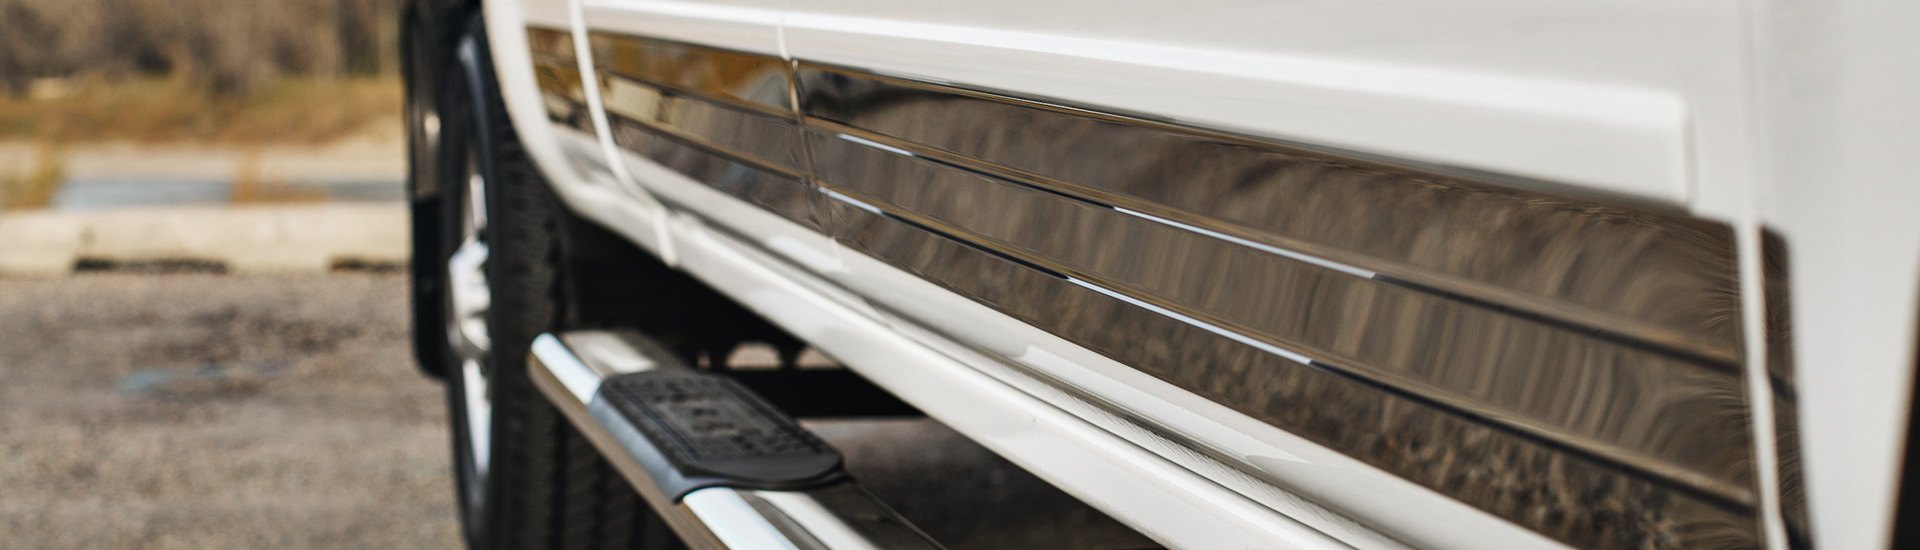 Rocker Panels: What Are They And Where Are They?